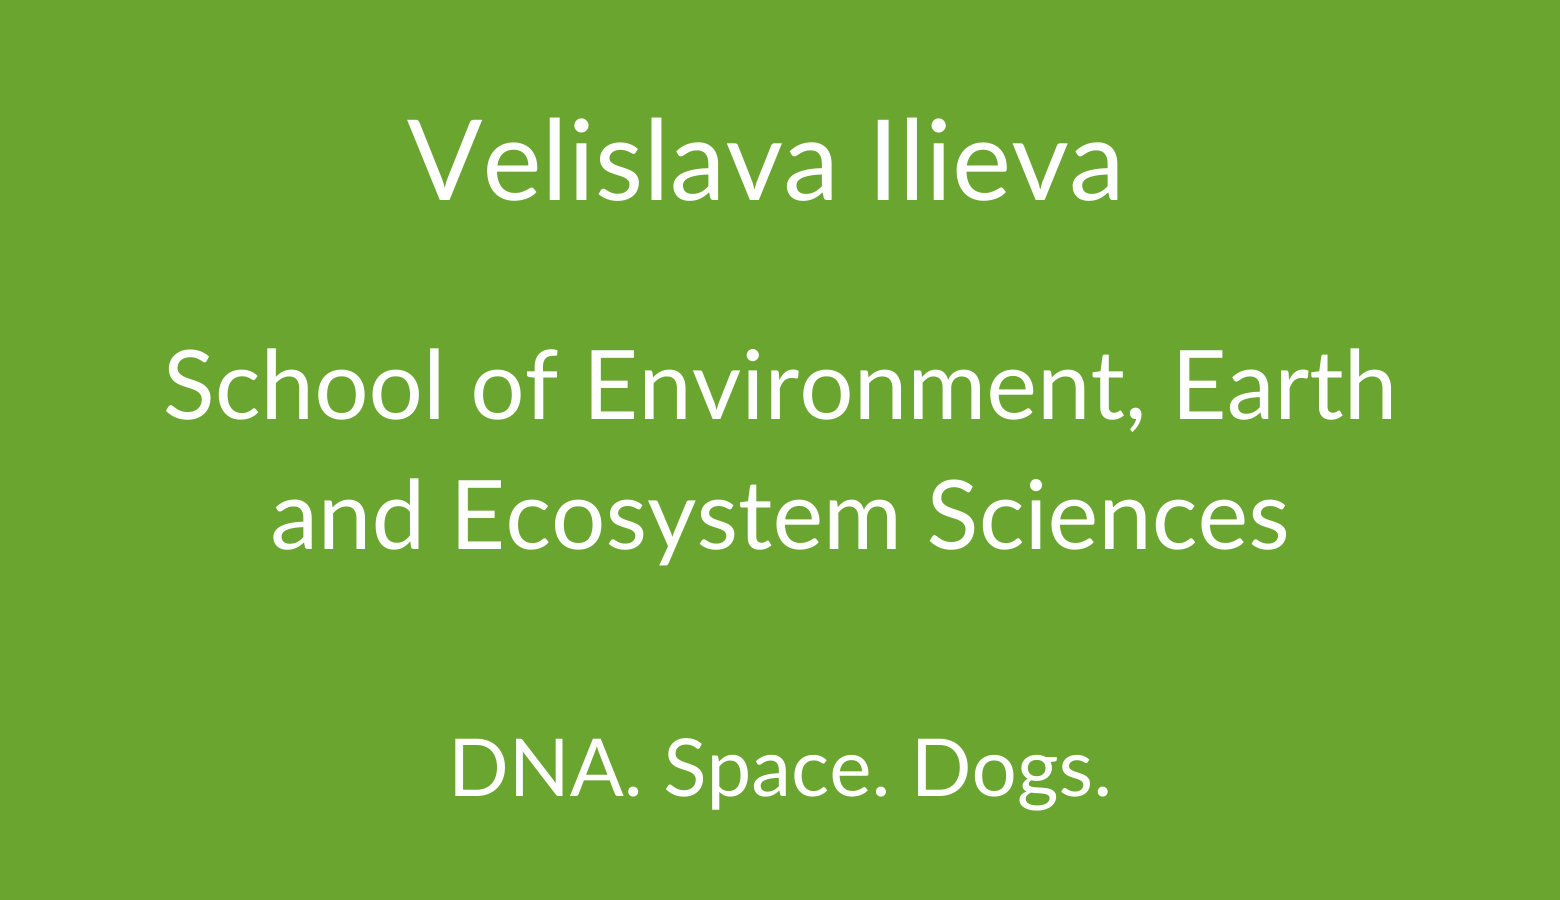 Velislava Ilieva.School of Environment, Earth and Ecosystem Sciences . DNA. Space. Dogs.